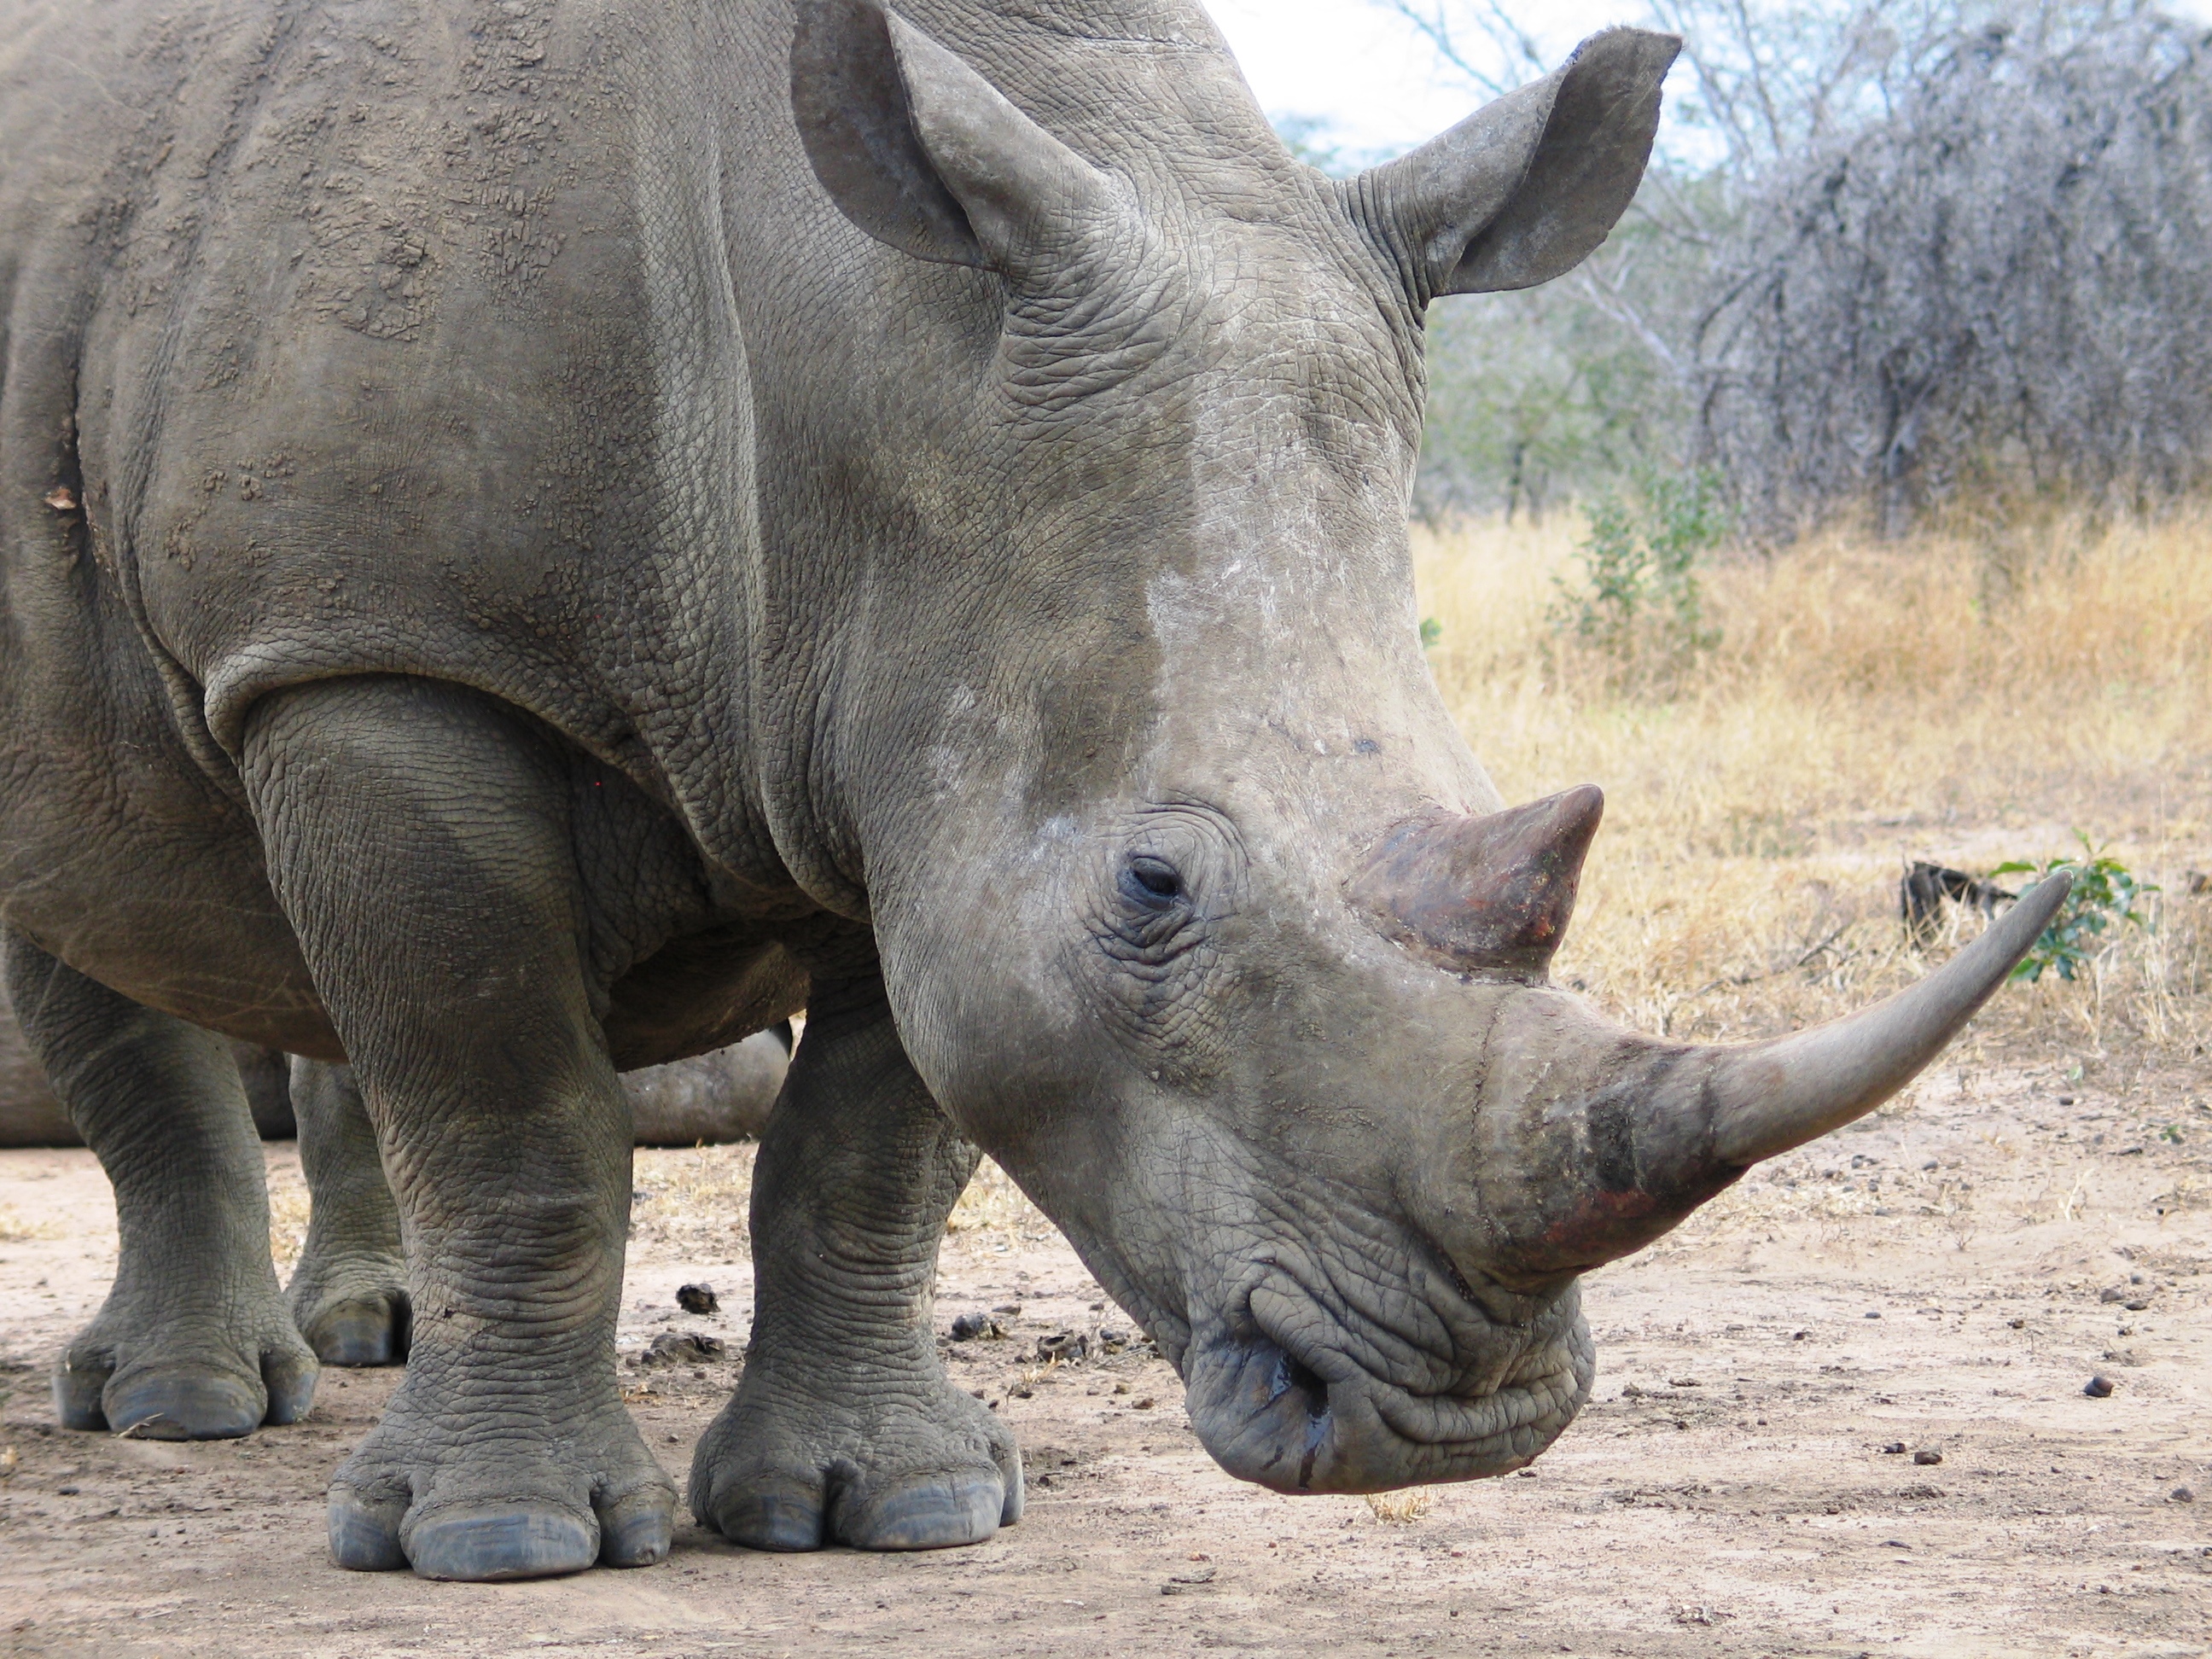 Close-up of southern white rhinoceros with grassland and shrubs in background